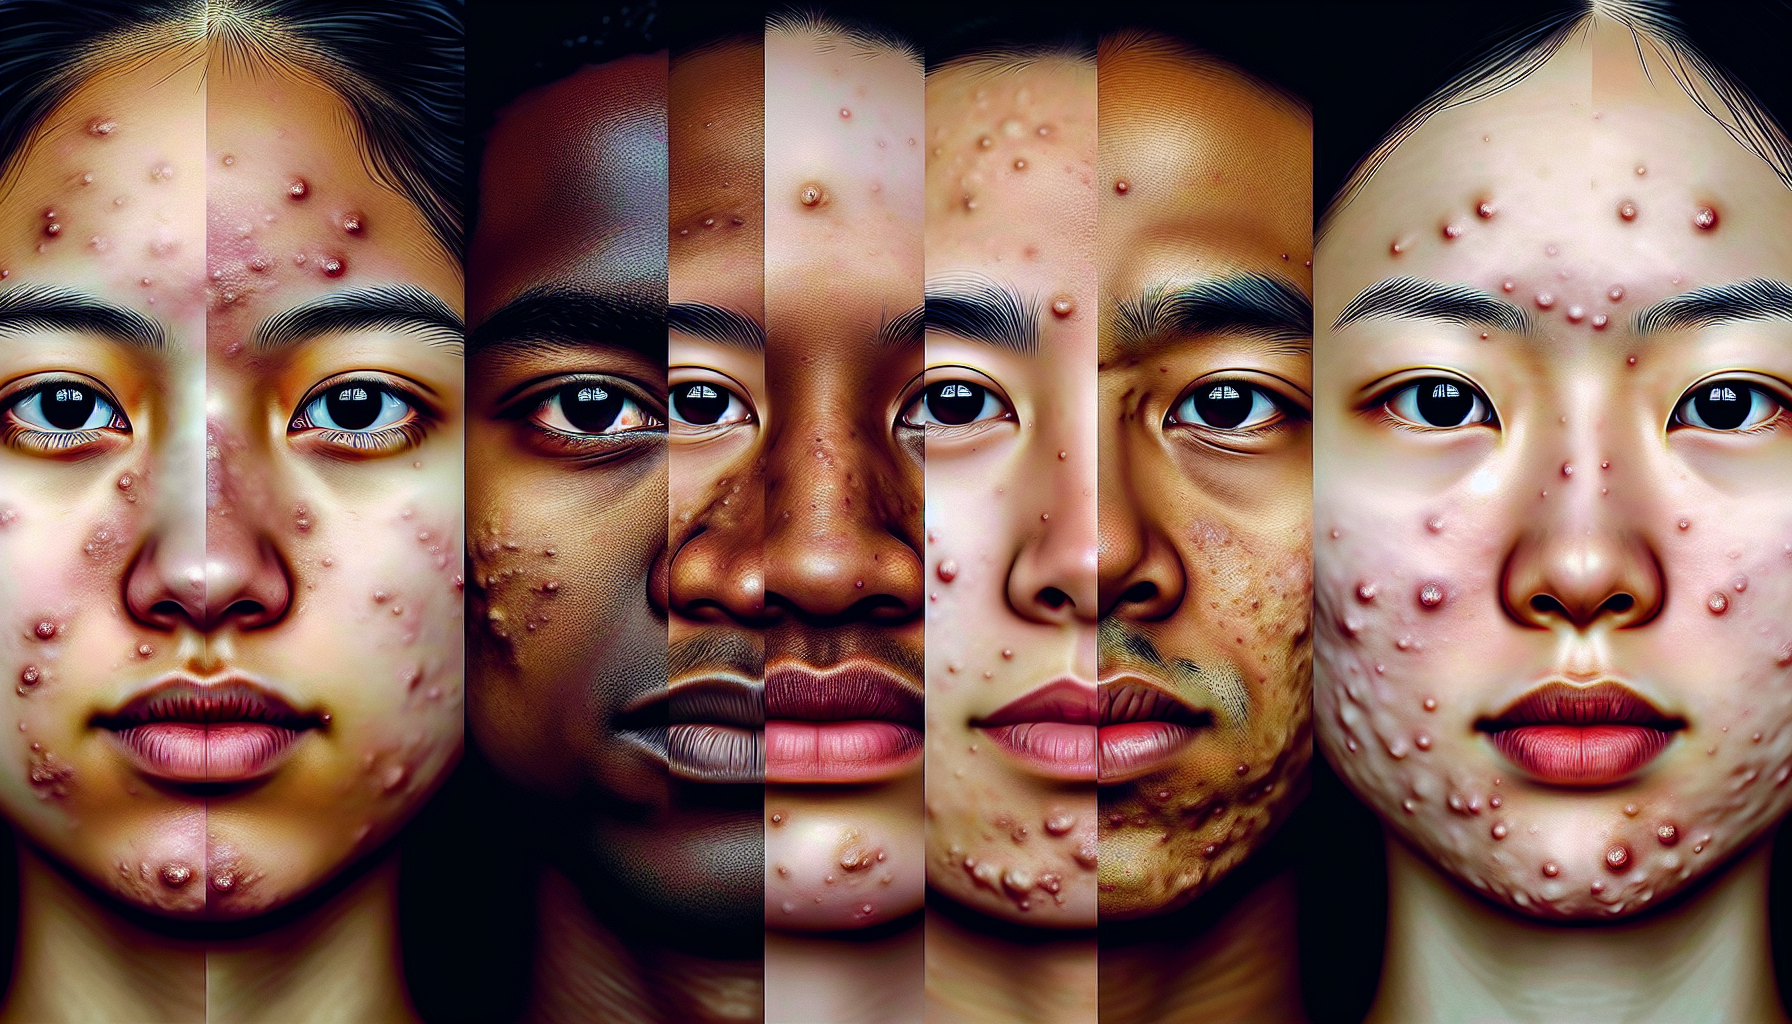 What Ethnicity Is Most Prone To Acne?